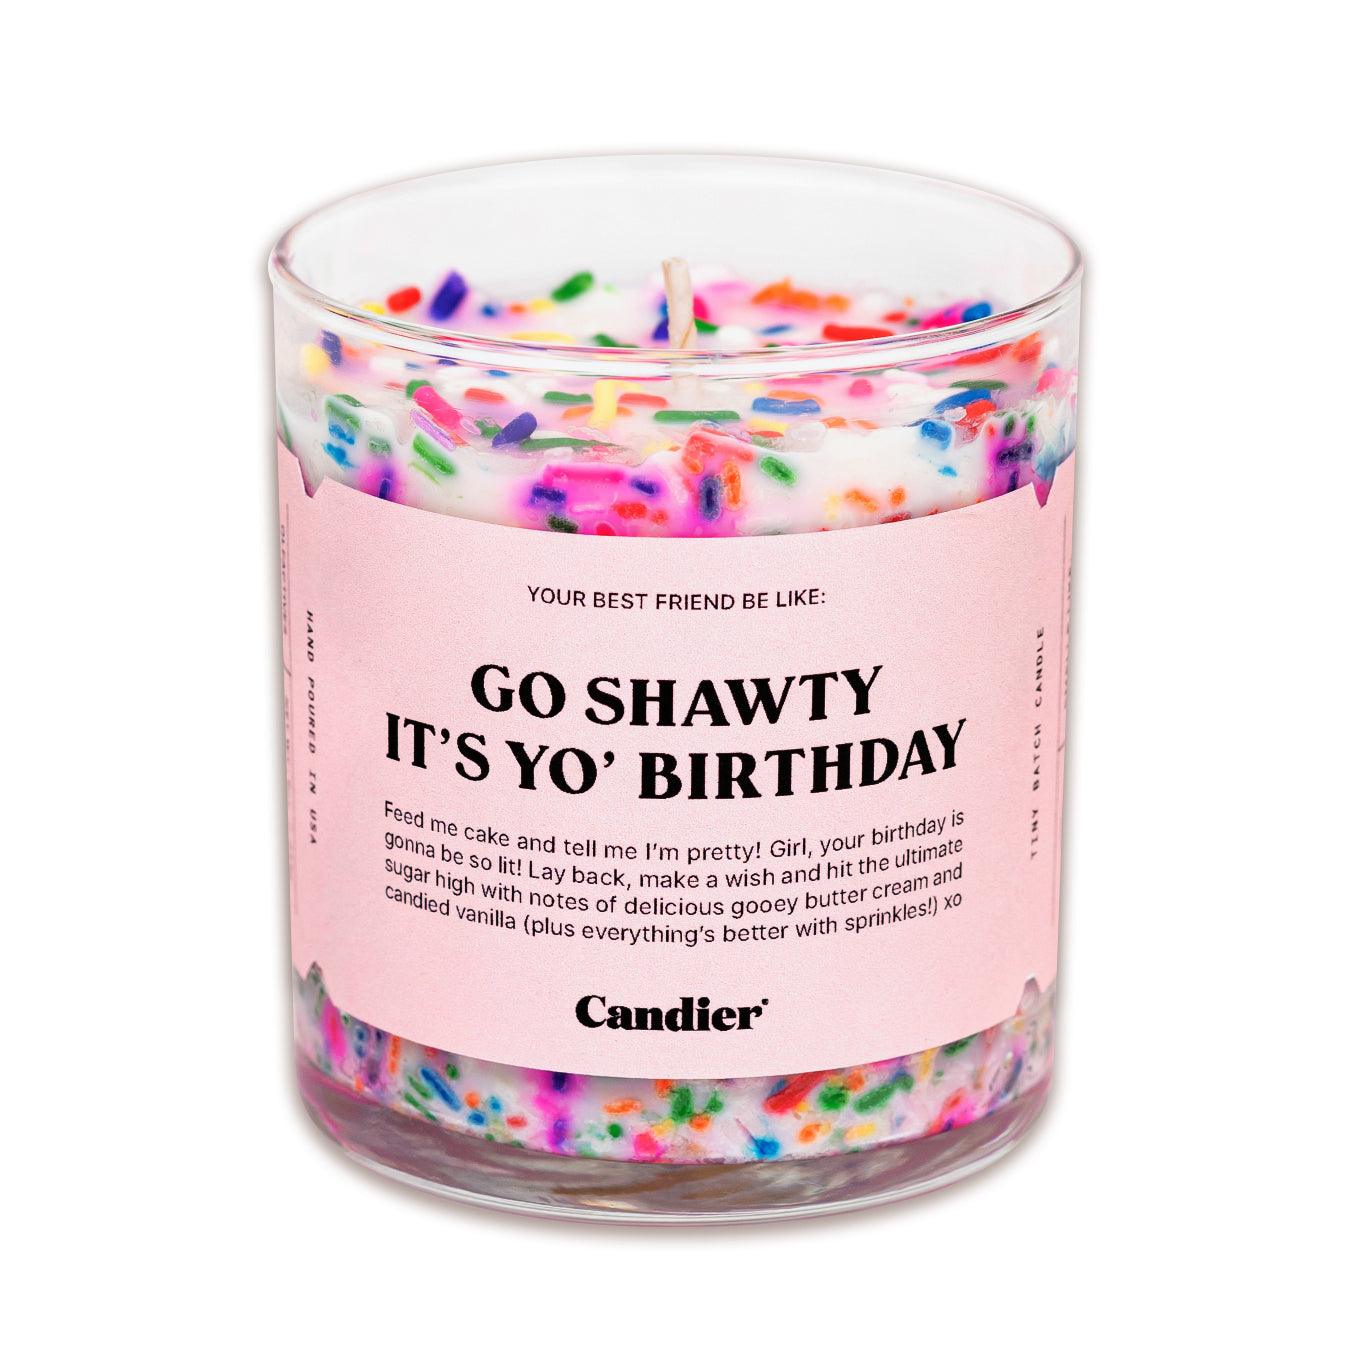 BIRTHDAY CAKE CANDLE - The Candle Club